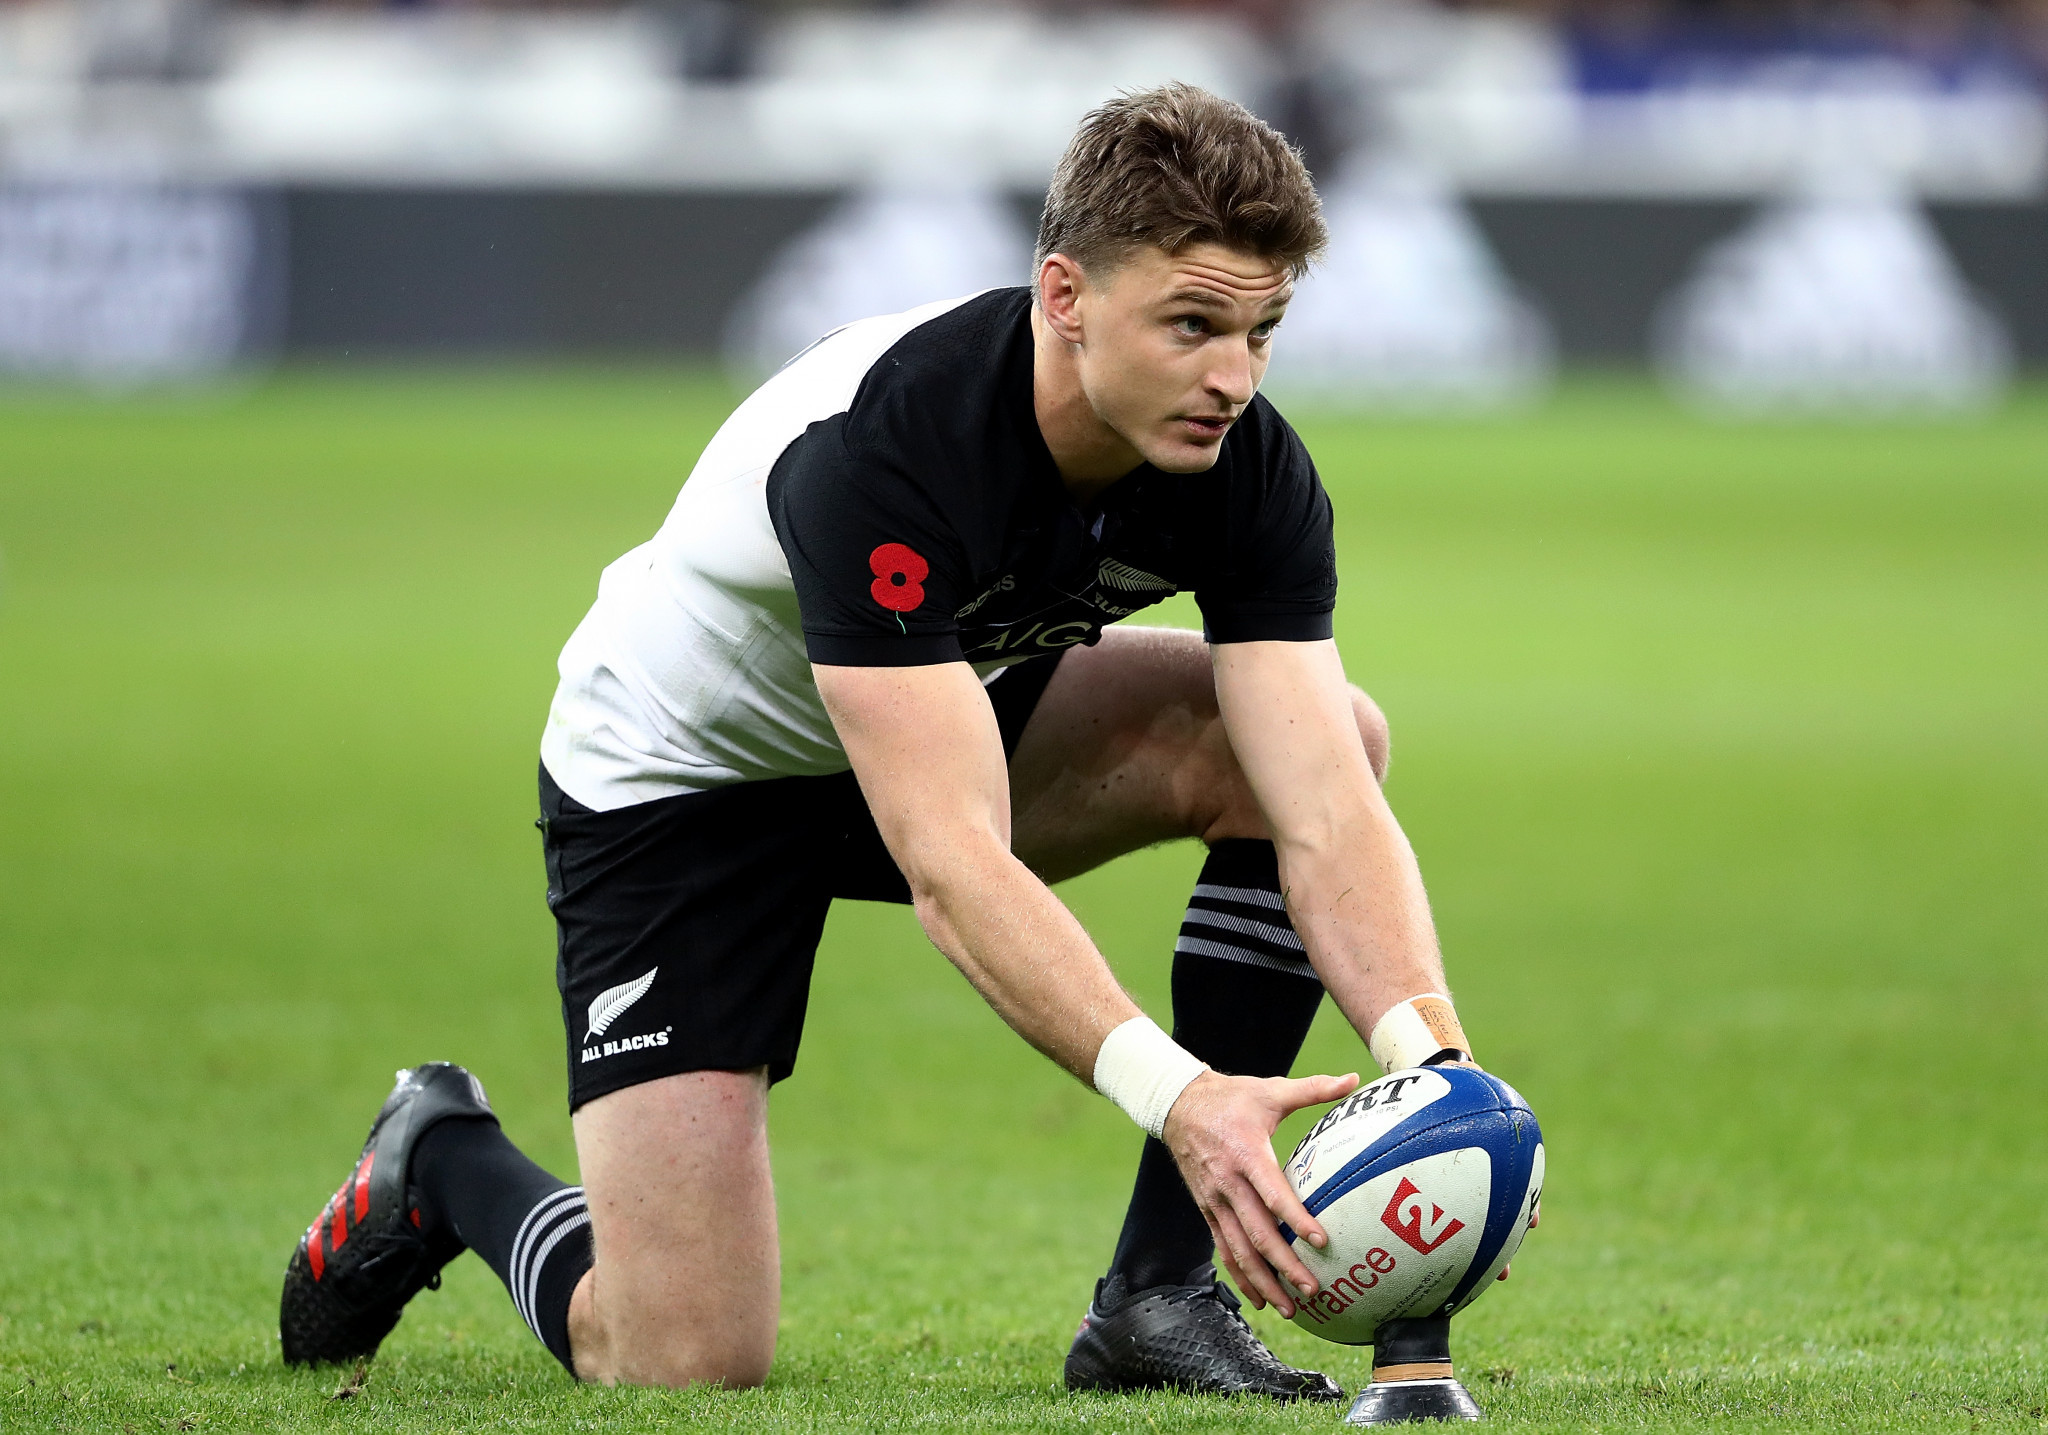 Beauden Barrett of New Zealand could claim the World Rugby men's award for the second year in a row ©Getty Images